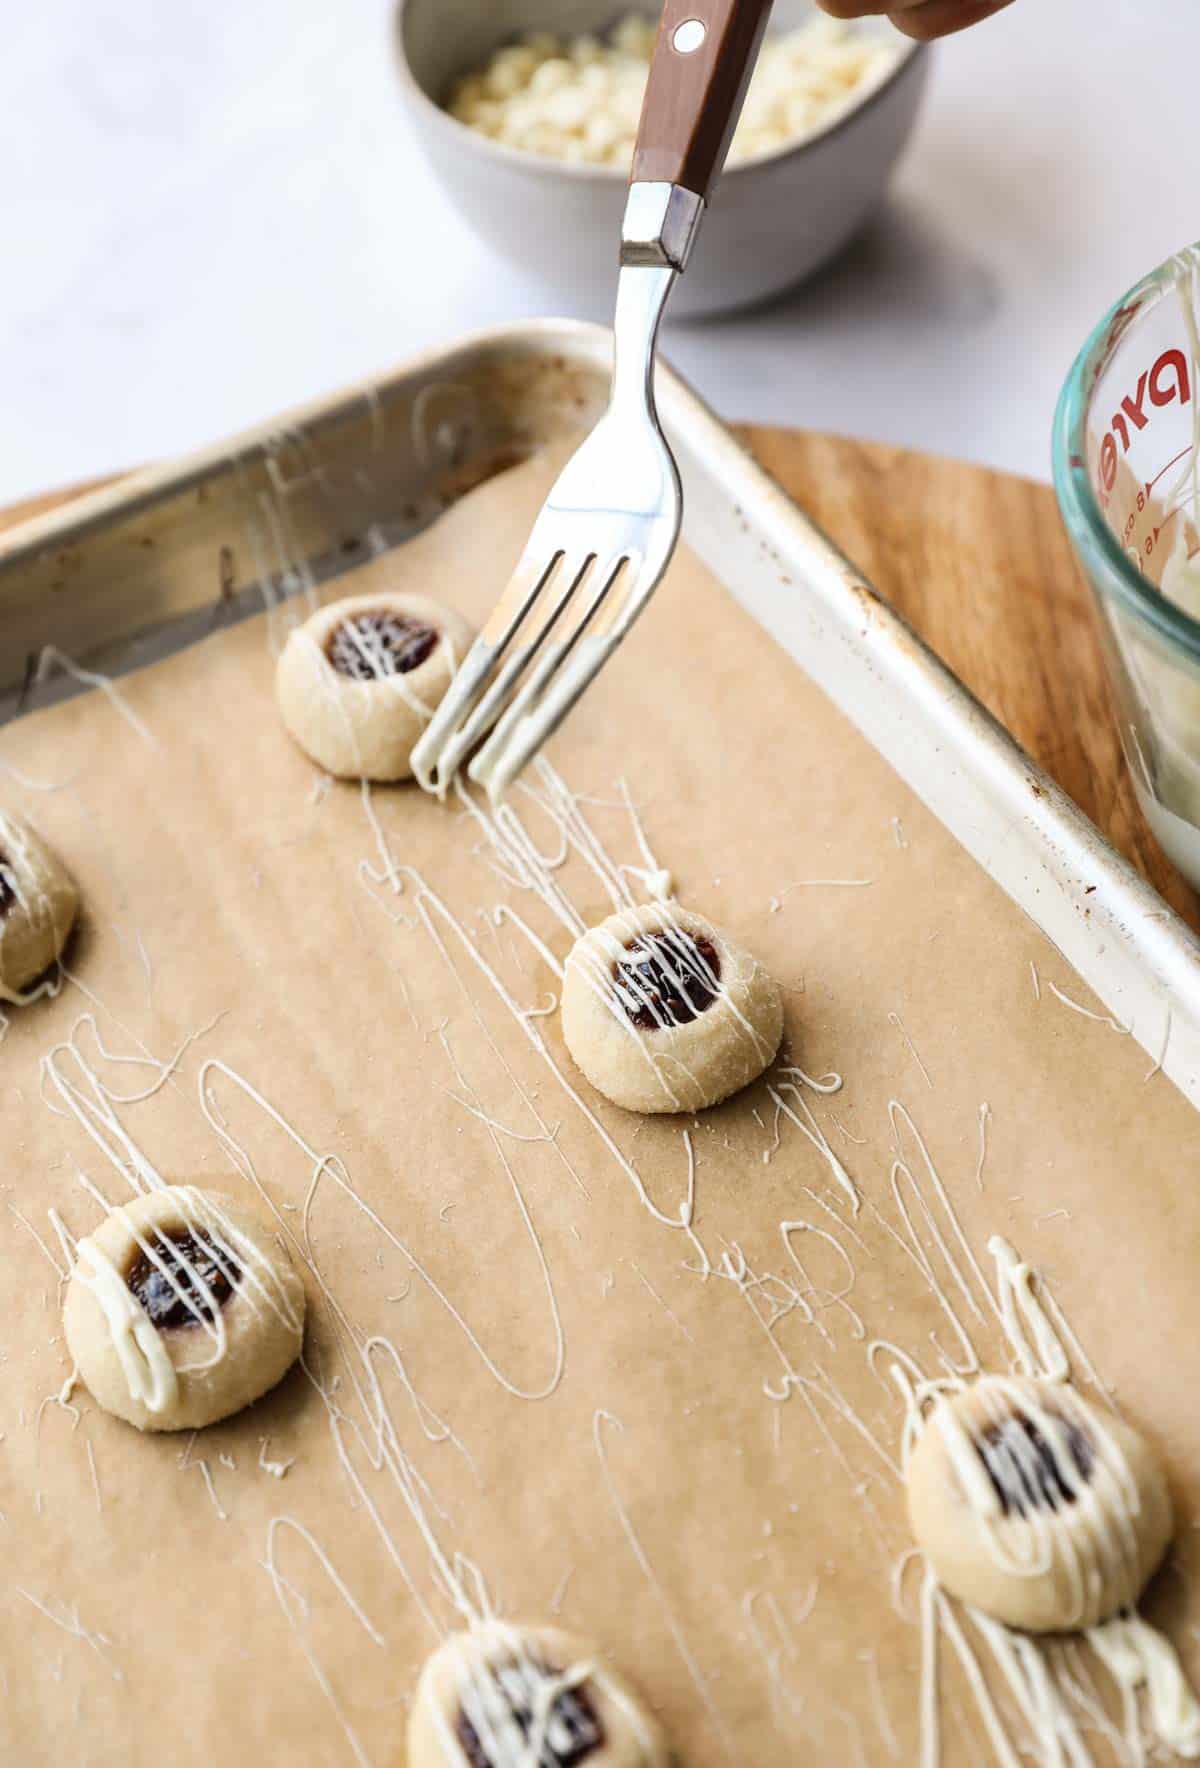 White Chocolate being drizzled on a cookie